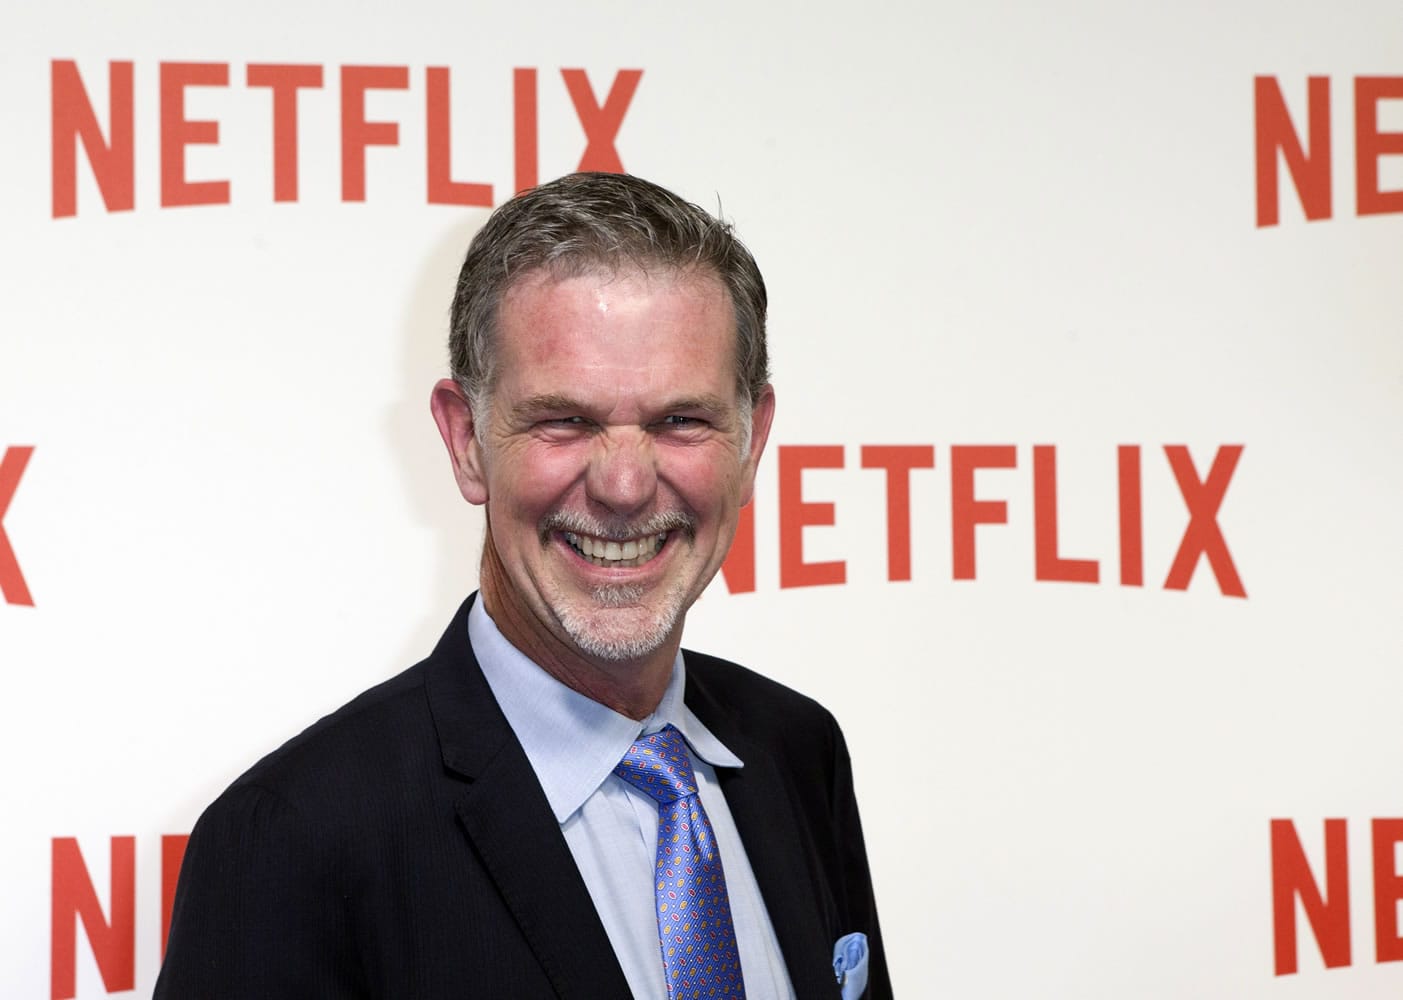 Netflix CEO Reed Hastings made a surprise announcement at the end of a presentation Wednesday at CES in Las Vegas that the streaming service has expanded to 130 more countries.